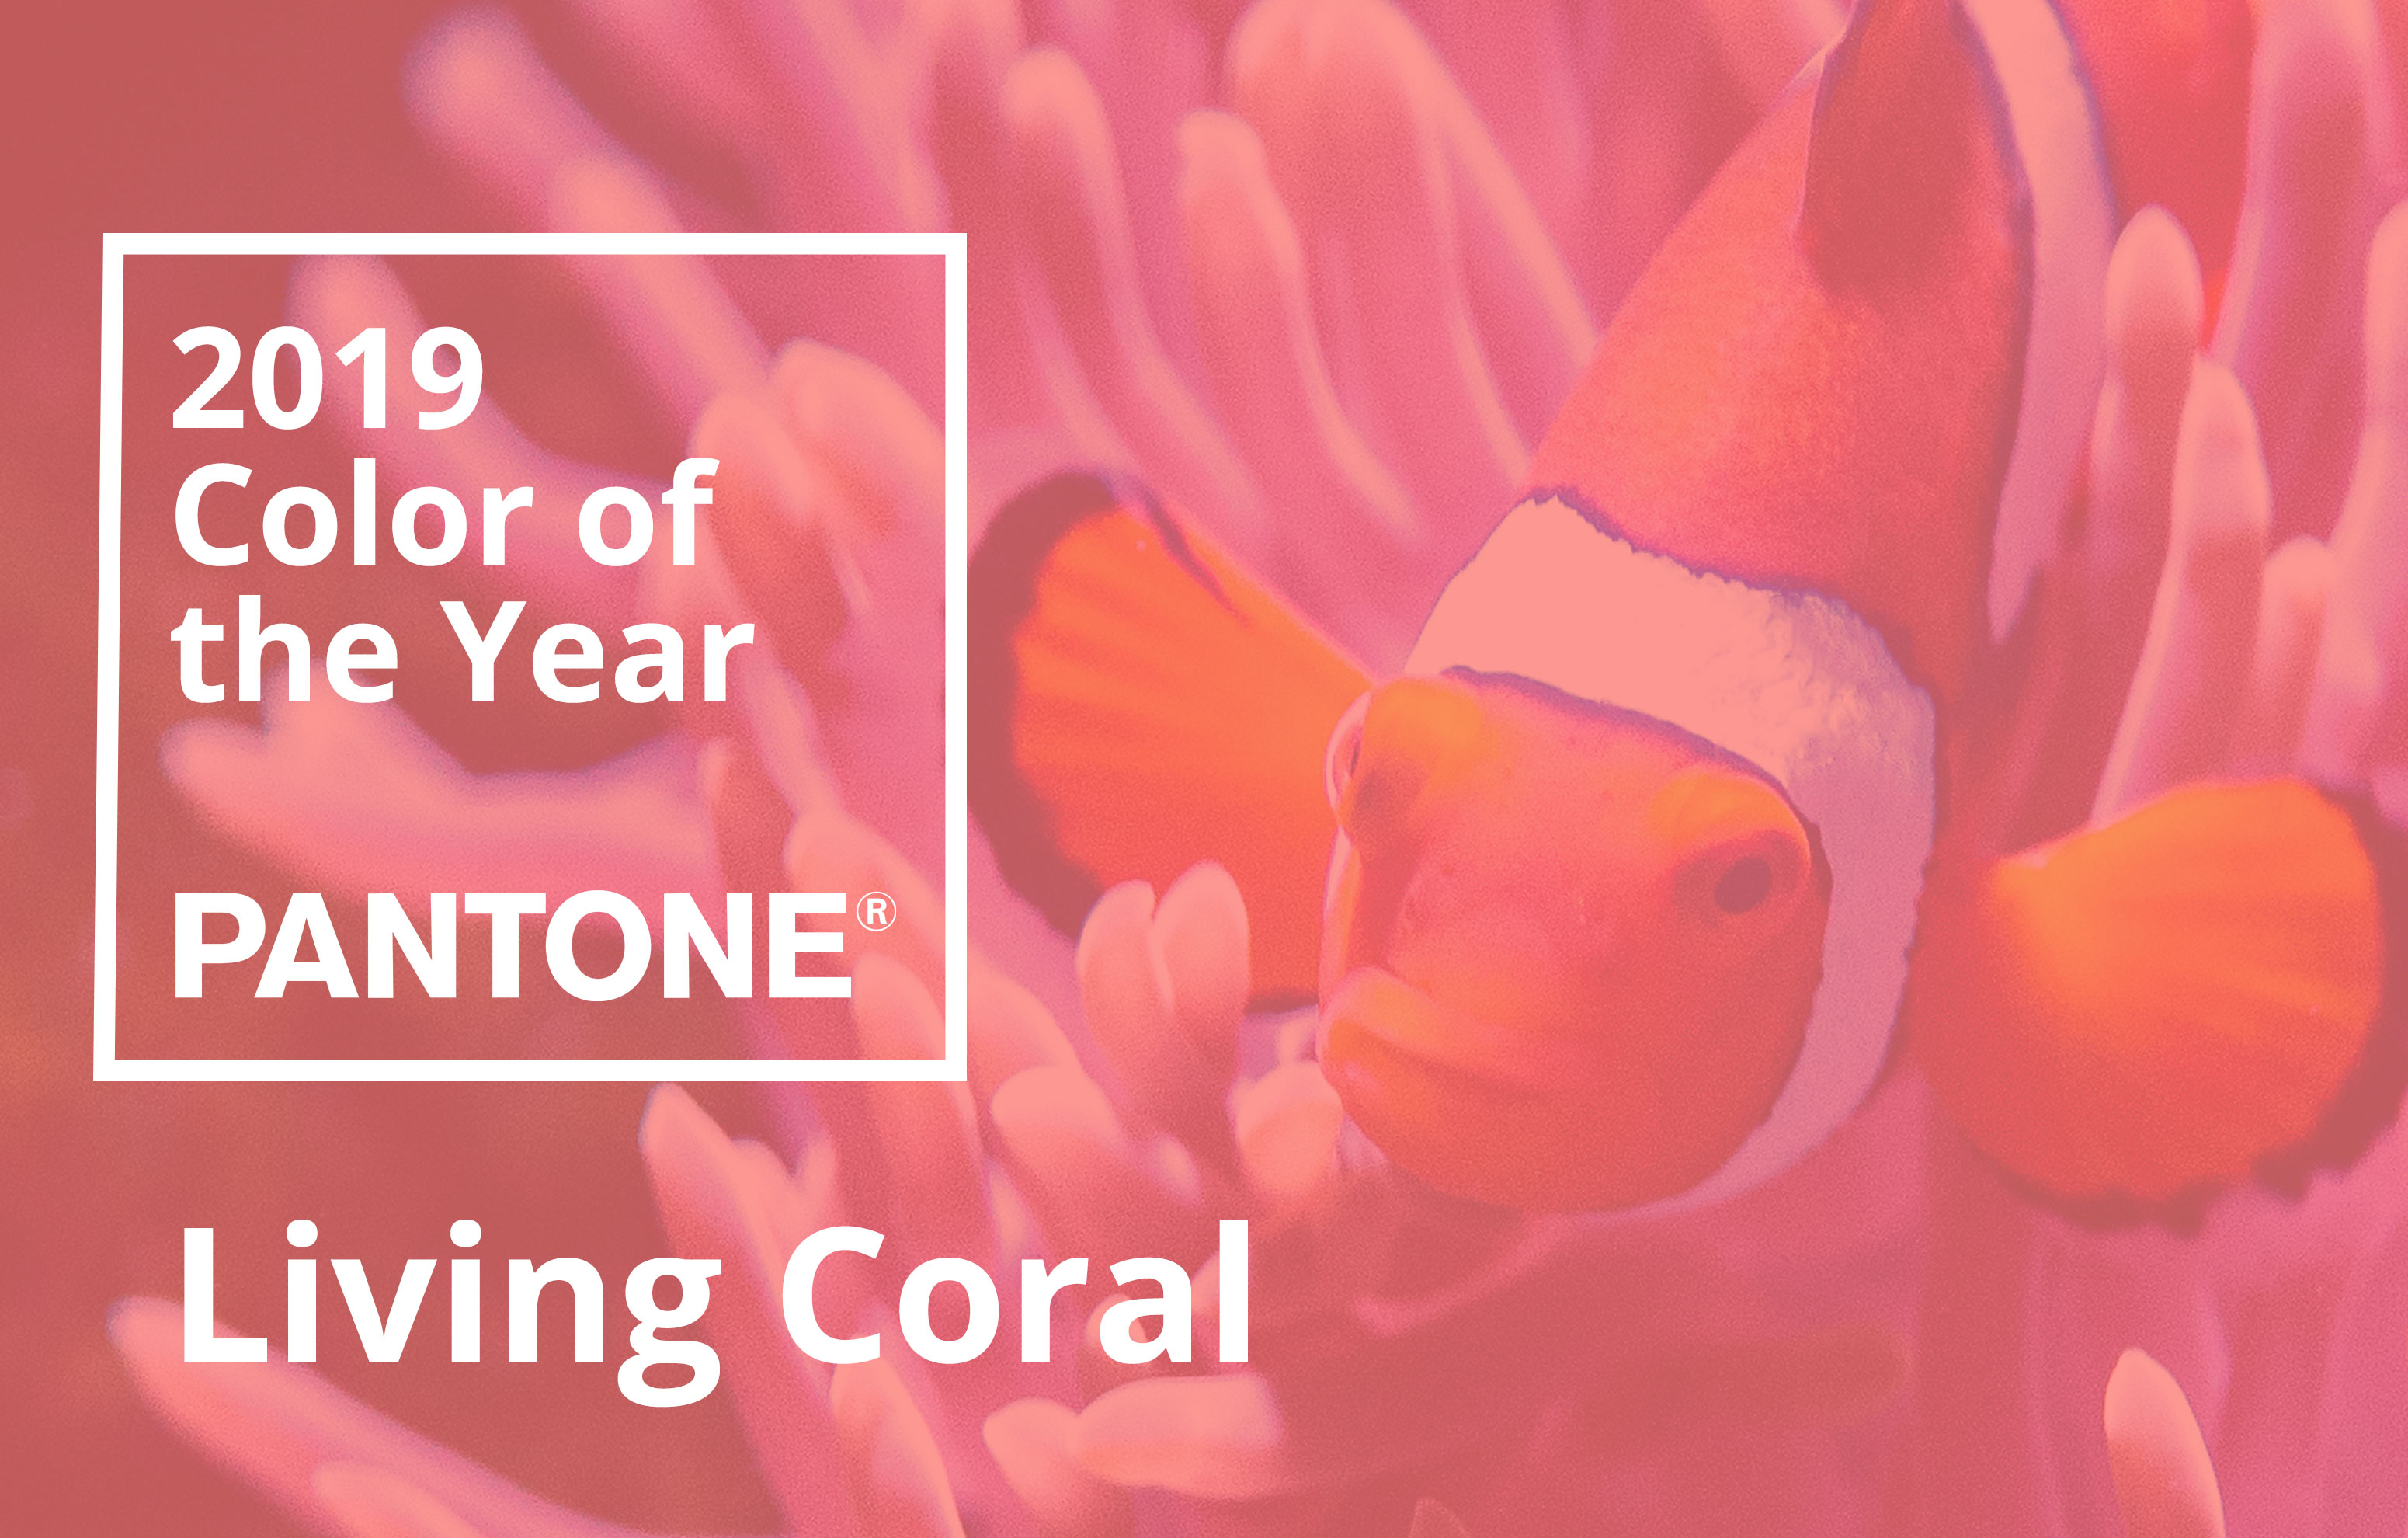 The 2019 Pantone Color of the Year is living coral. Other home design color trends include hazelnut, lilac gray, pewter, and pale blue.